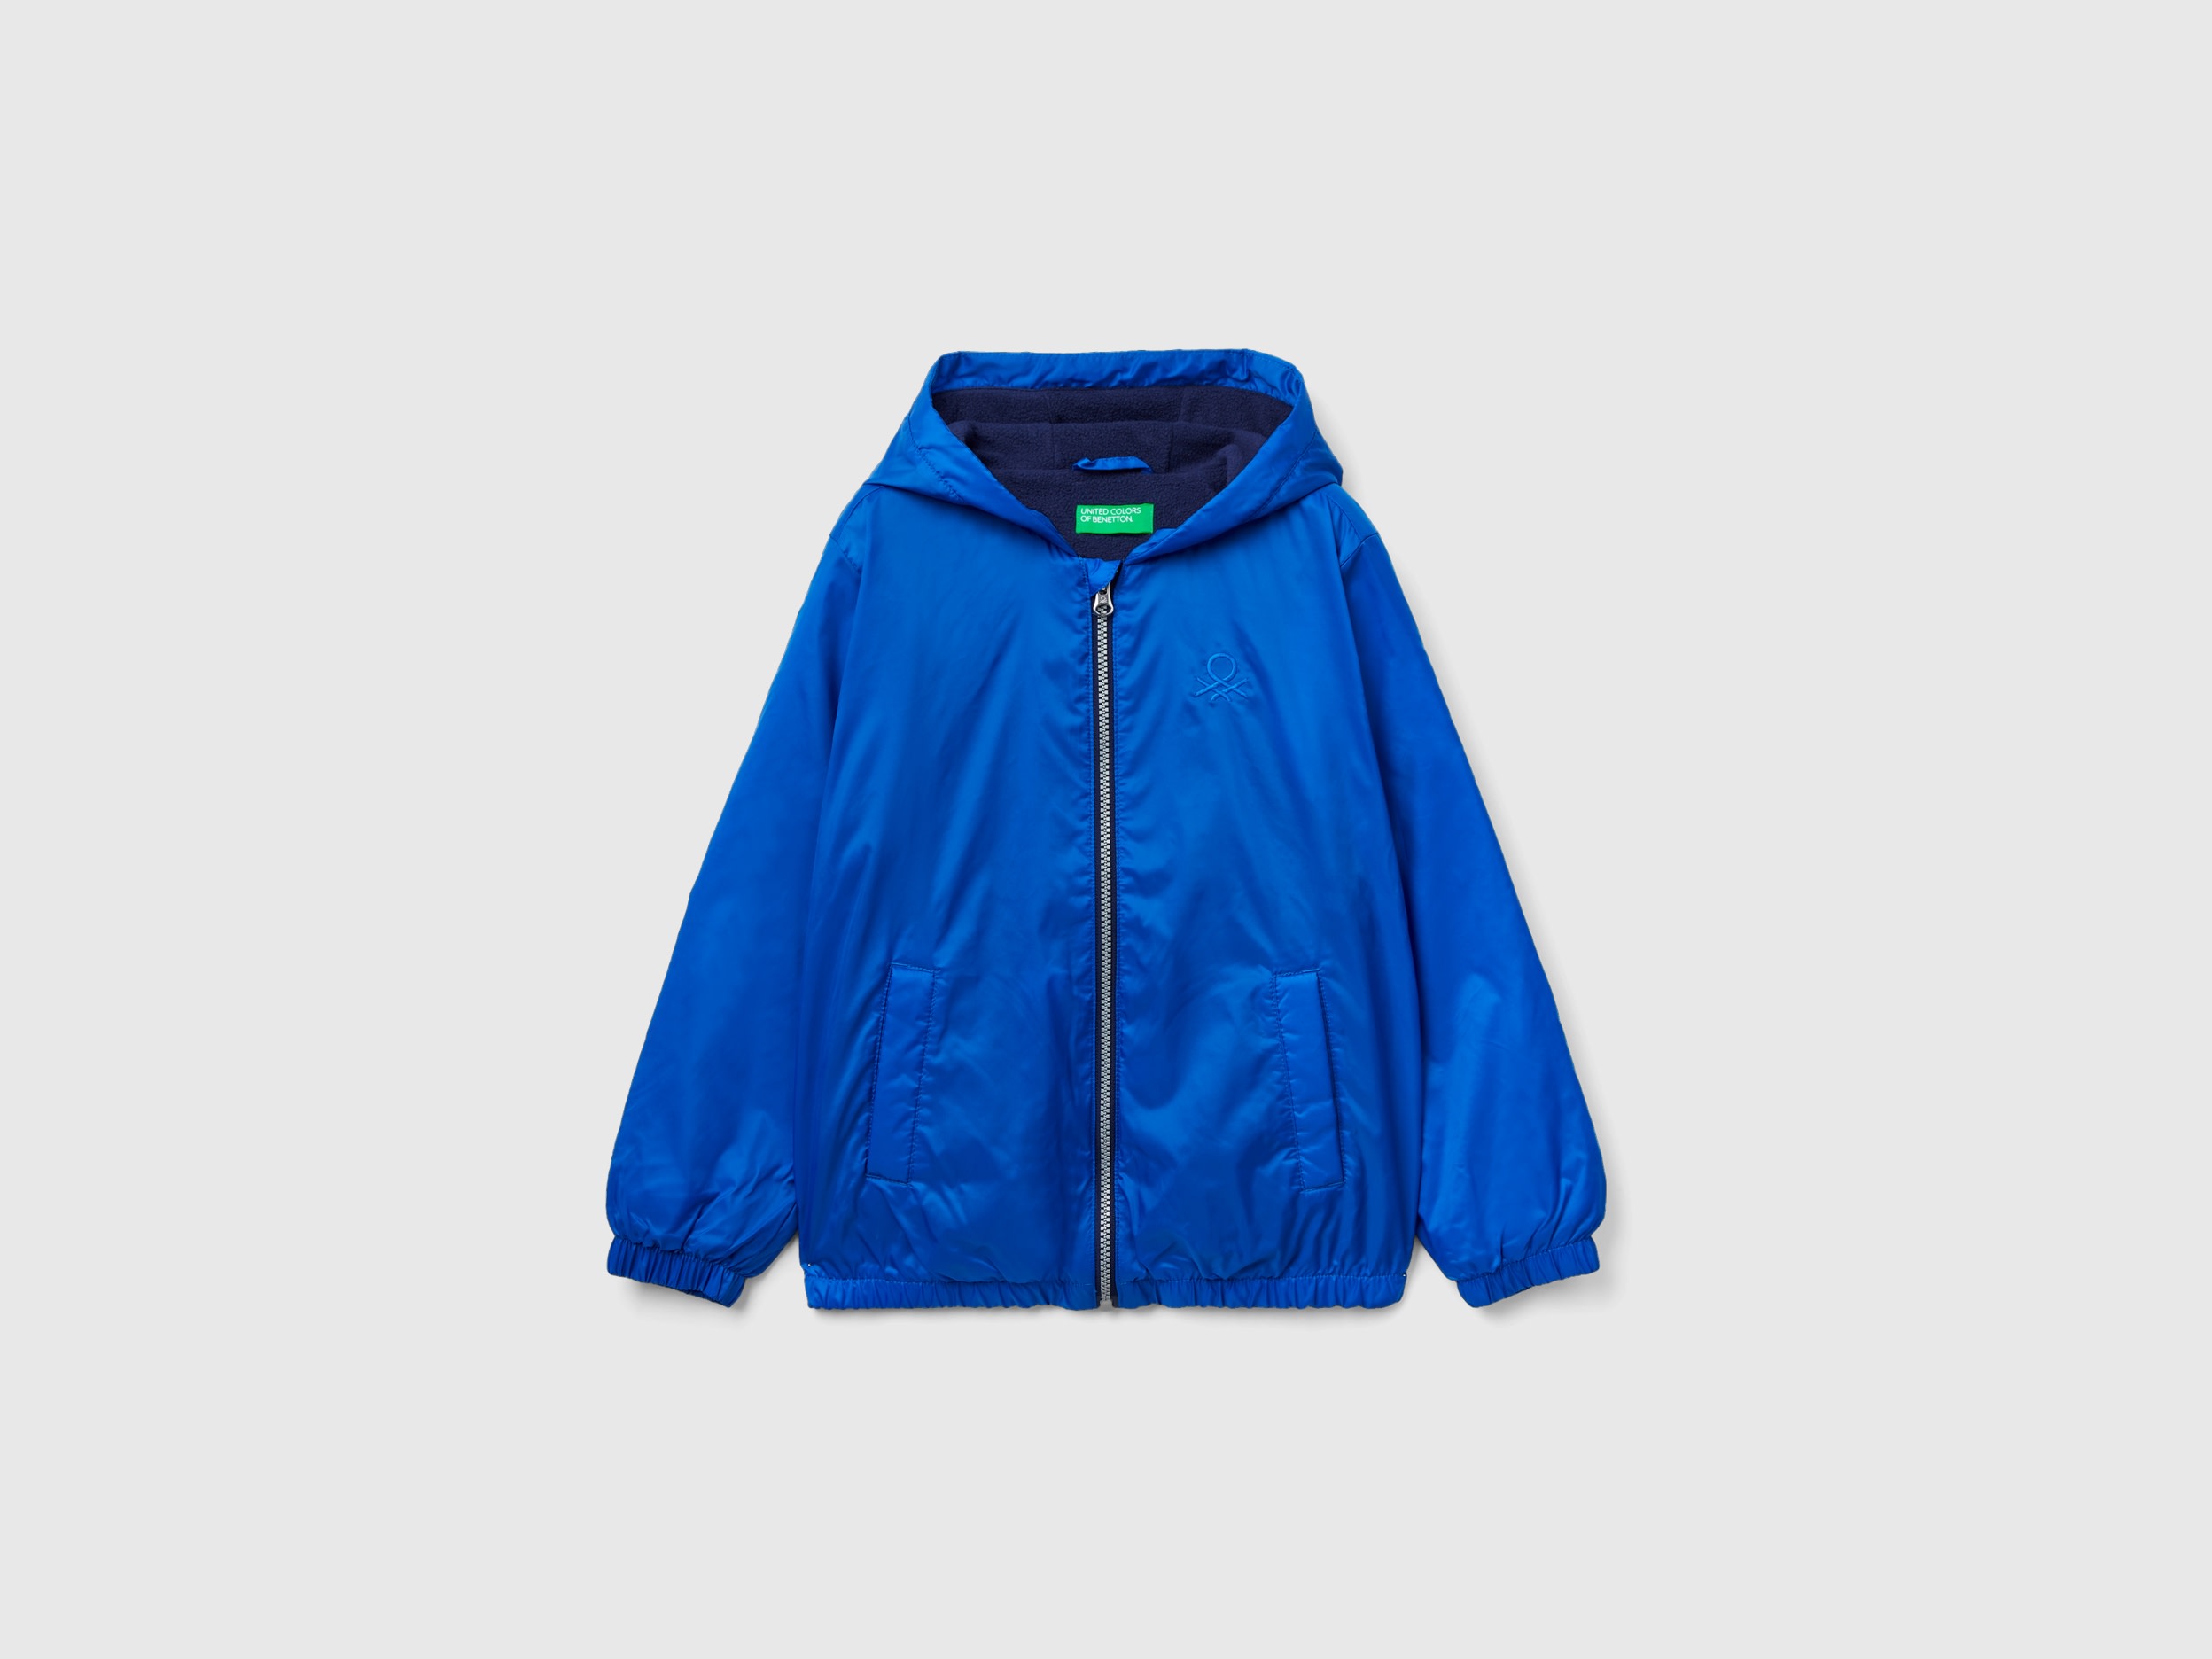 Benetton, Nylon Jacket With Zip And Hood, size 3XL, Bright Blue, Kids